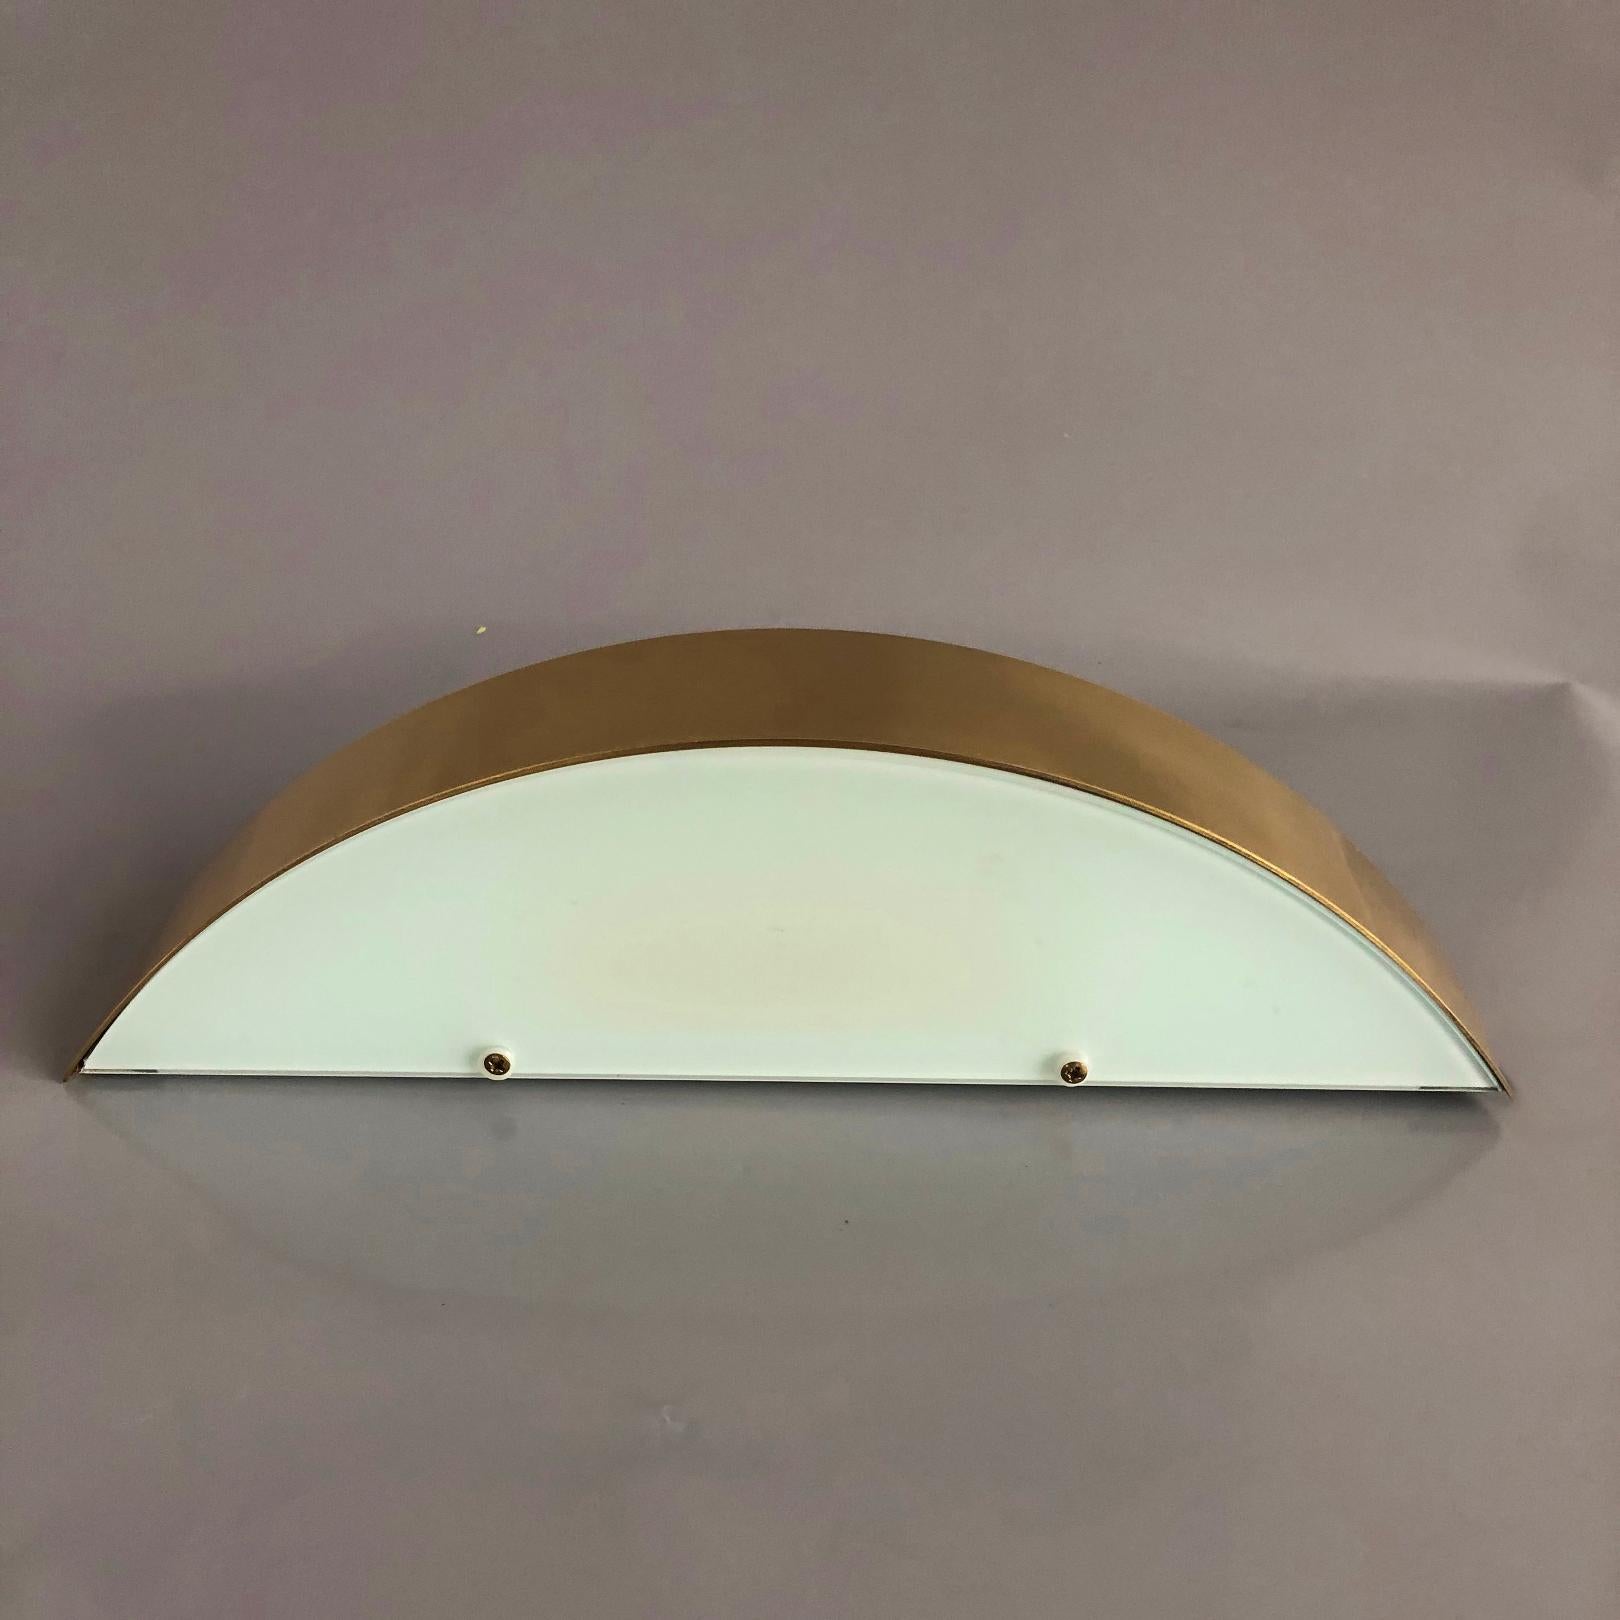 This Minimalist wall light in an was custom made in limited edition for a luxury hotel. This wall light model was not available on the market.